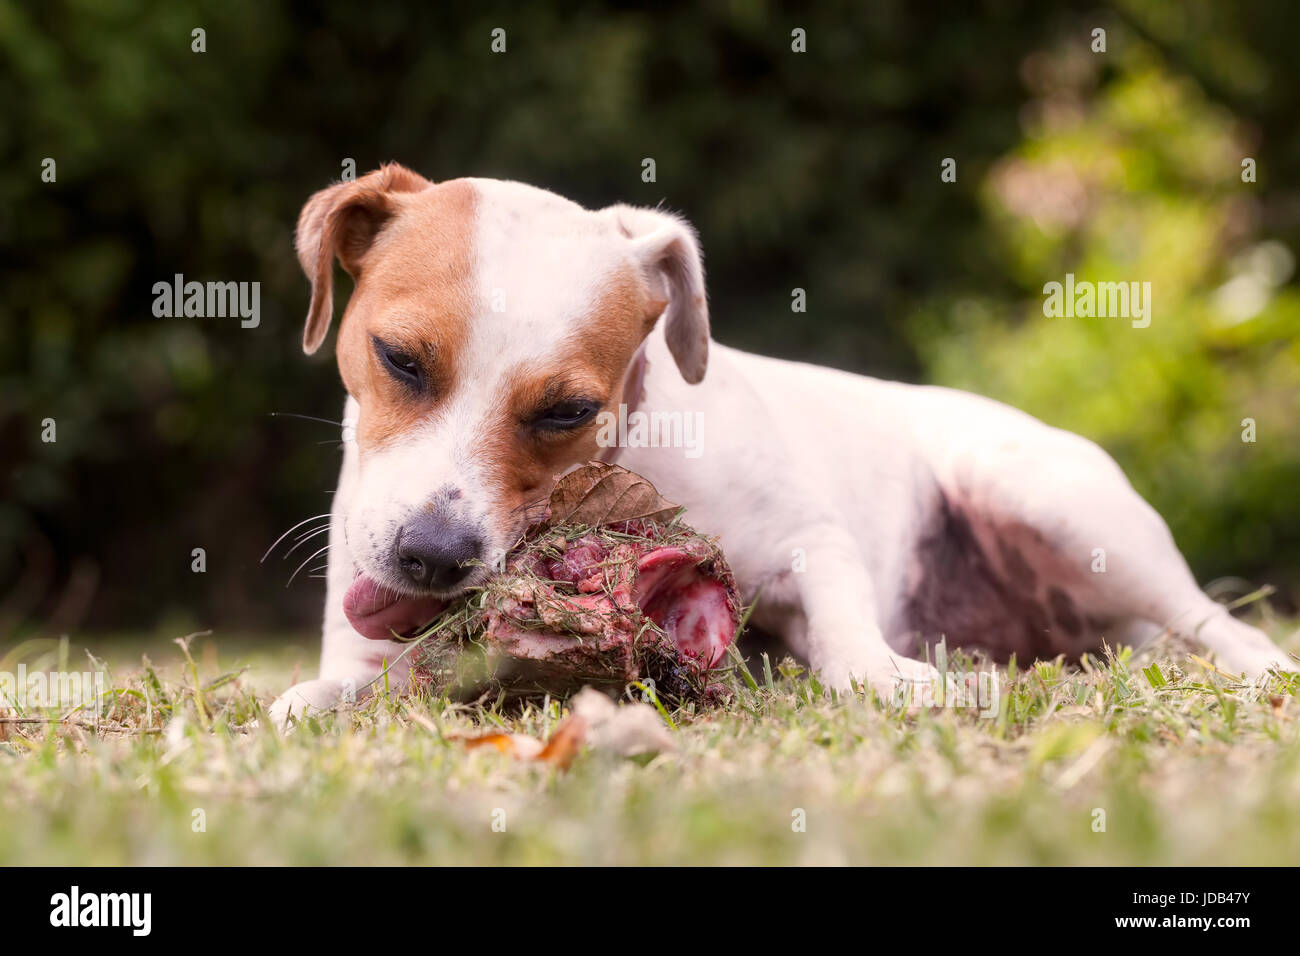 Jack Russell Terrier Angry Female Dog Protecting Big Bone With Meat Stock Photo